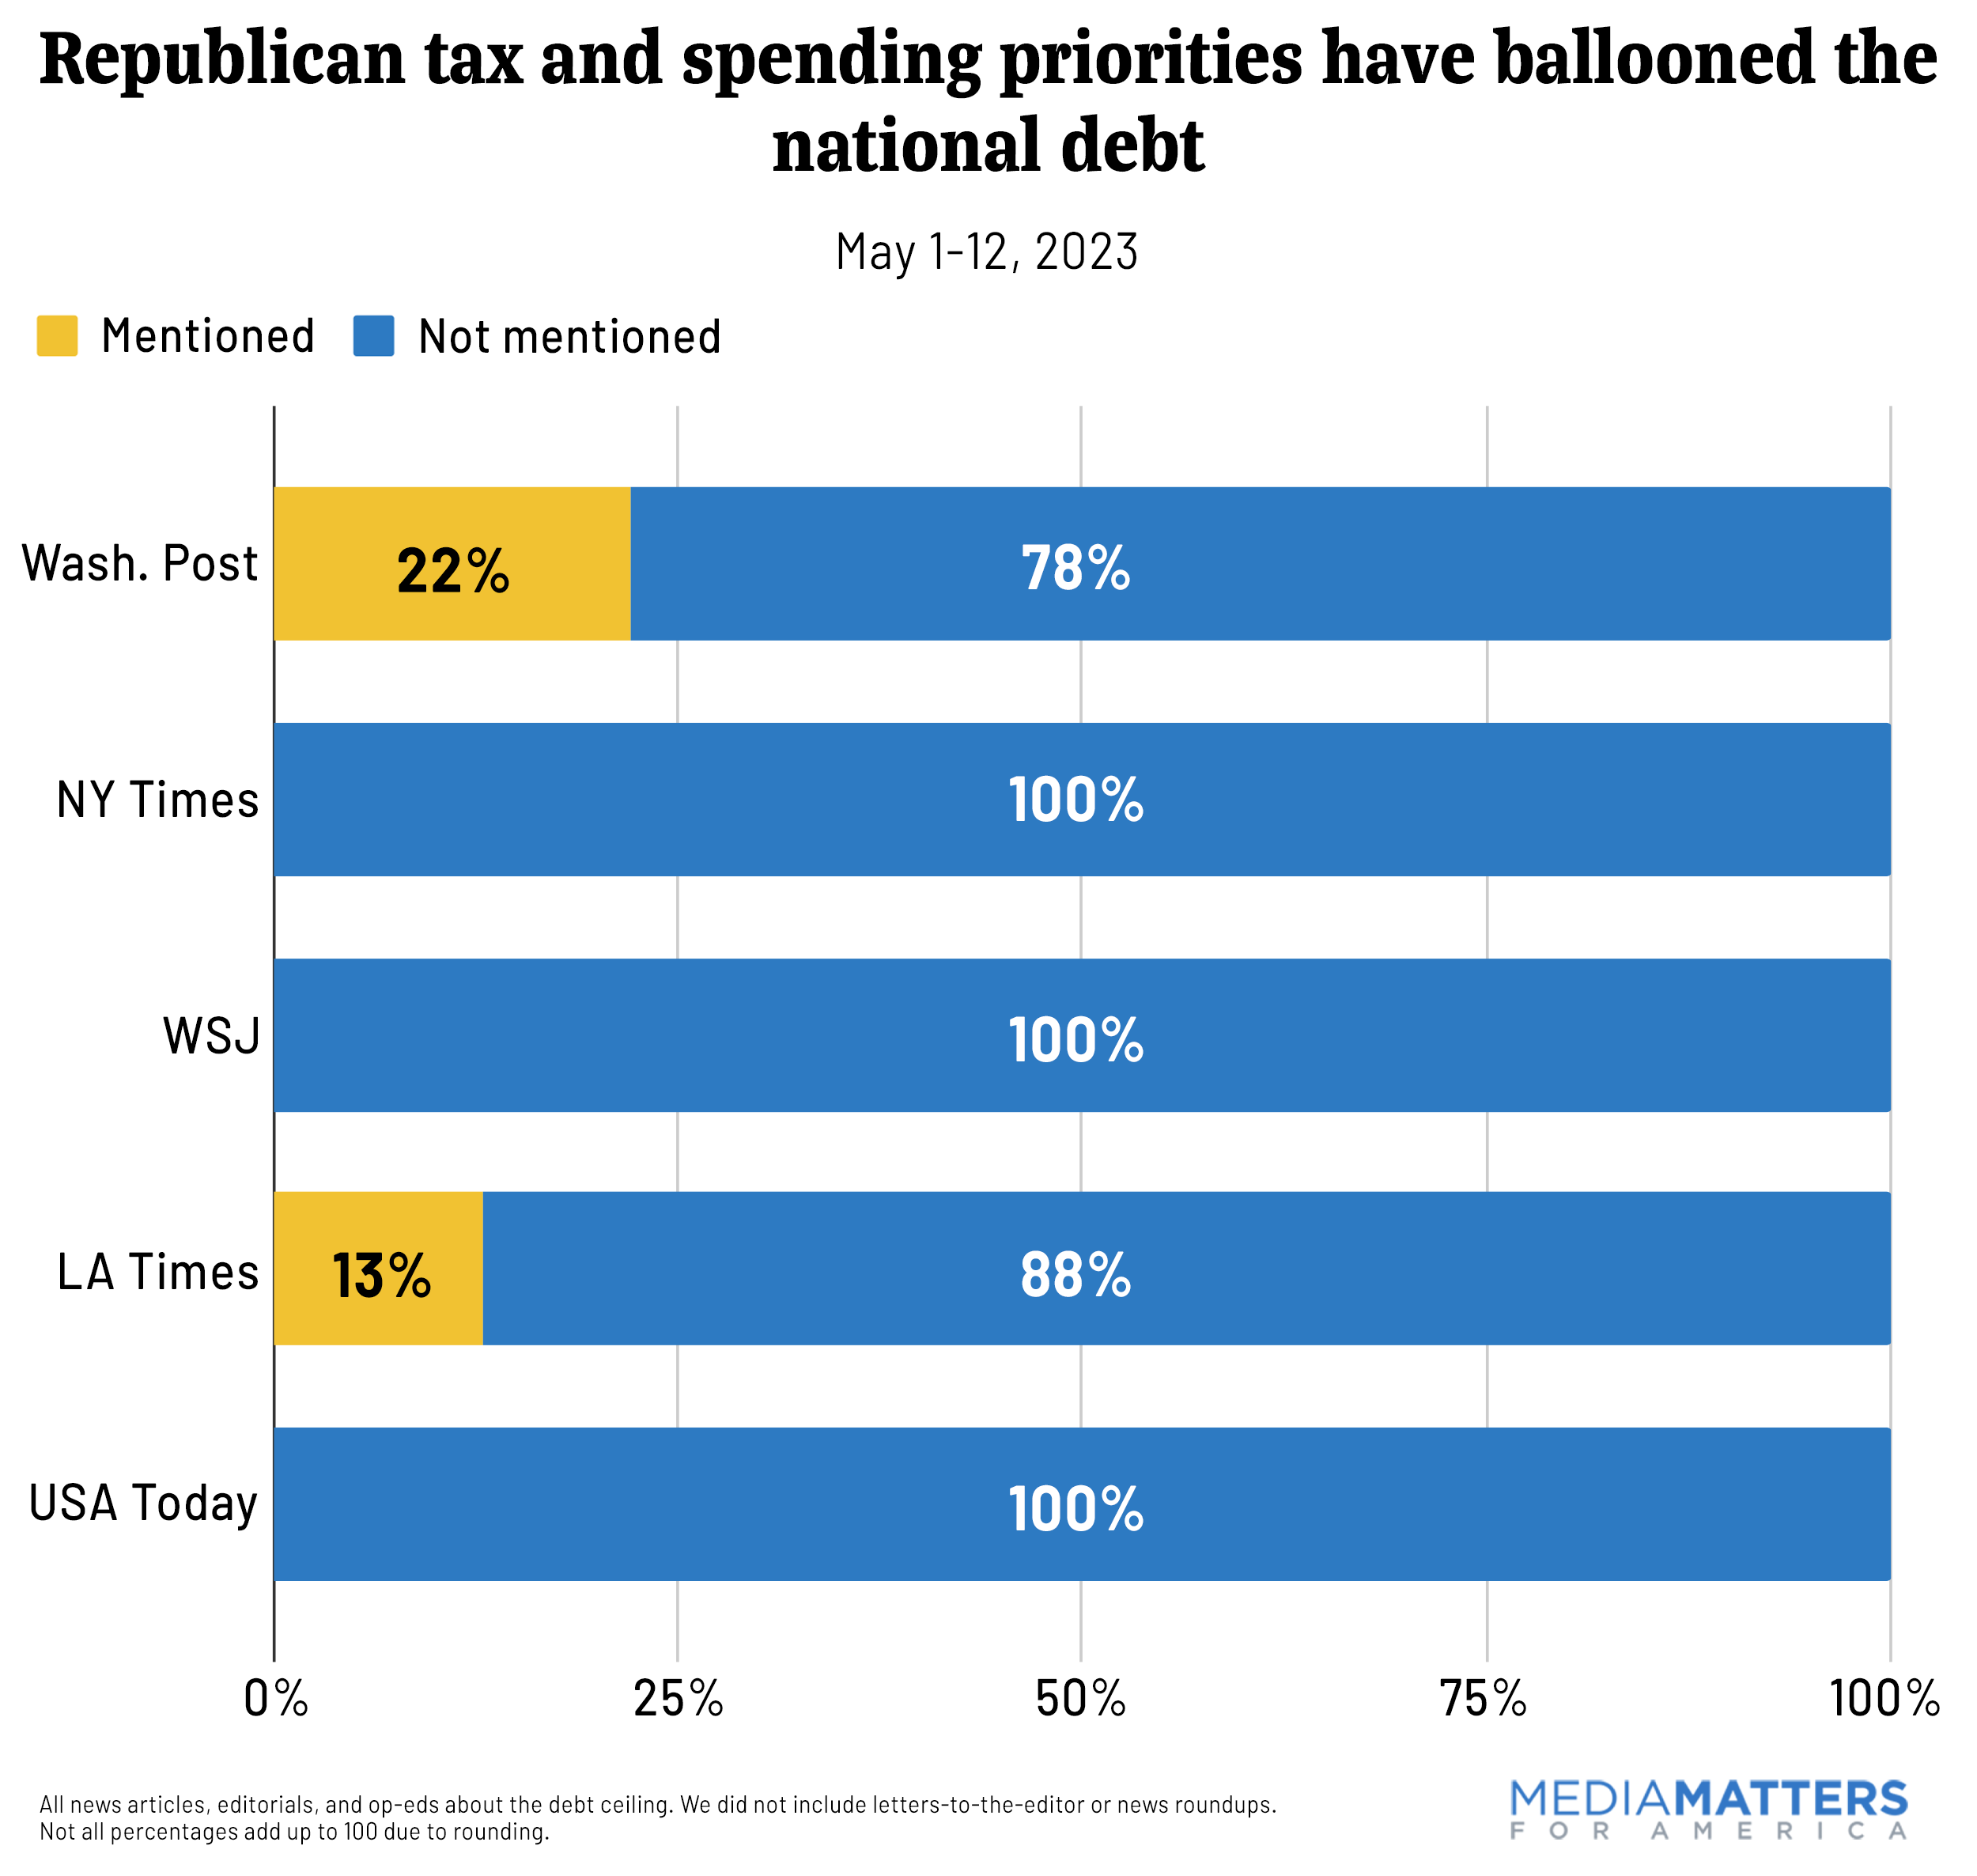 Republican tax and spending priorities have ballooned the national debt